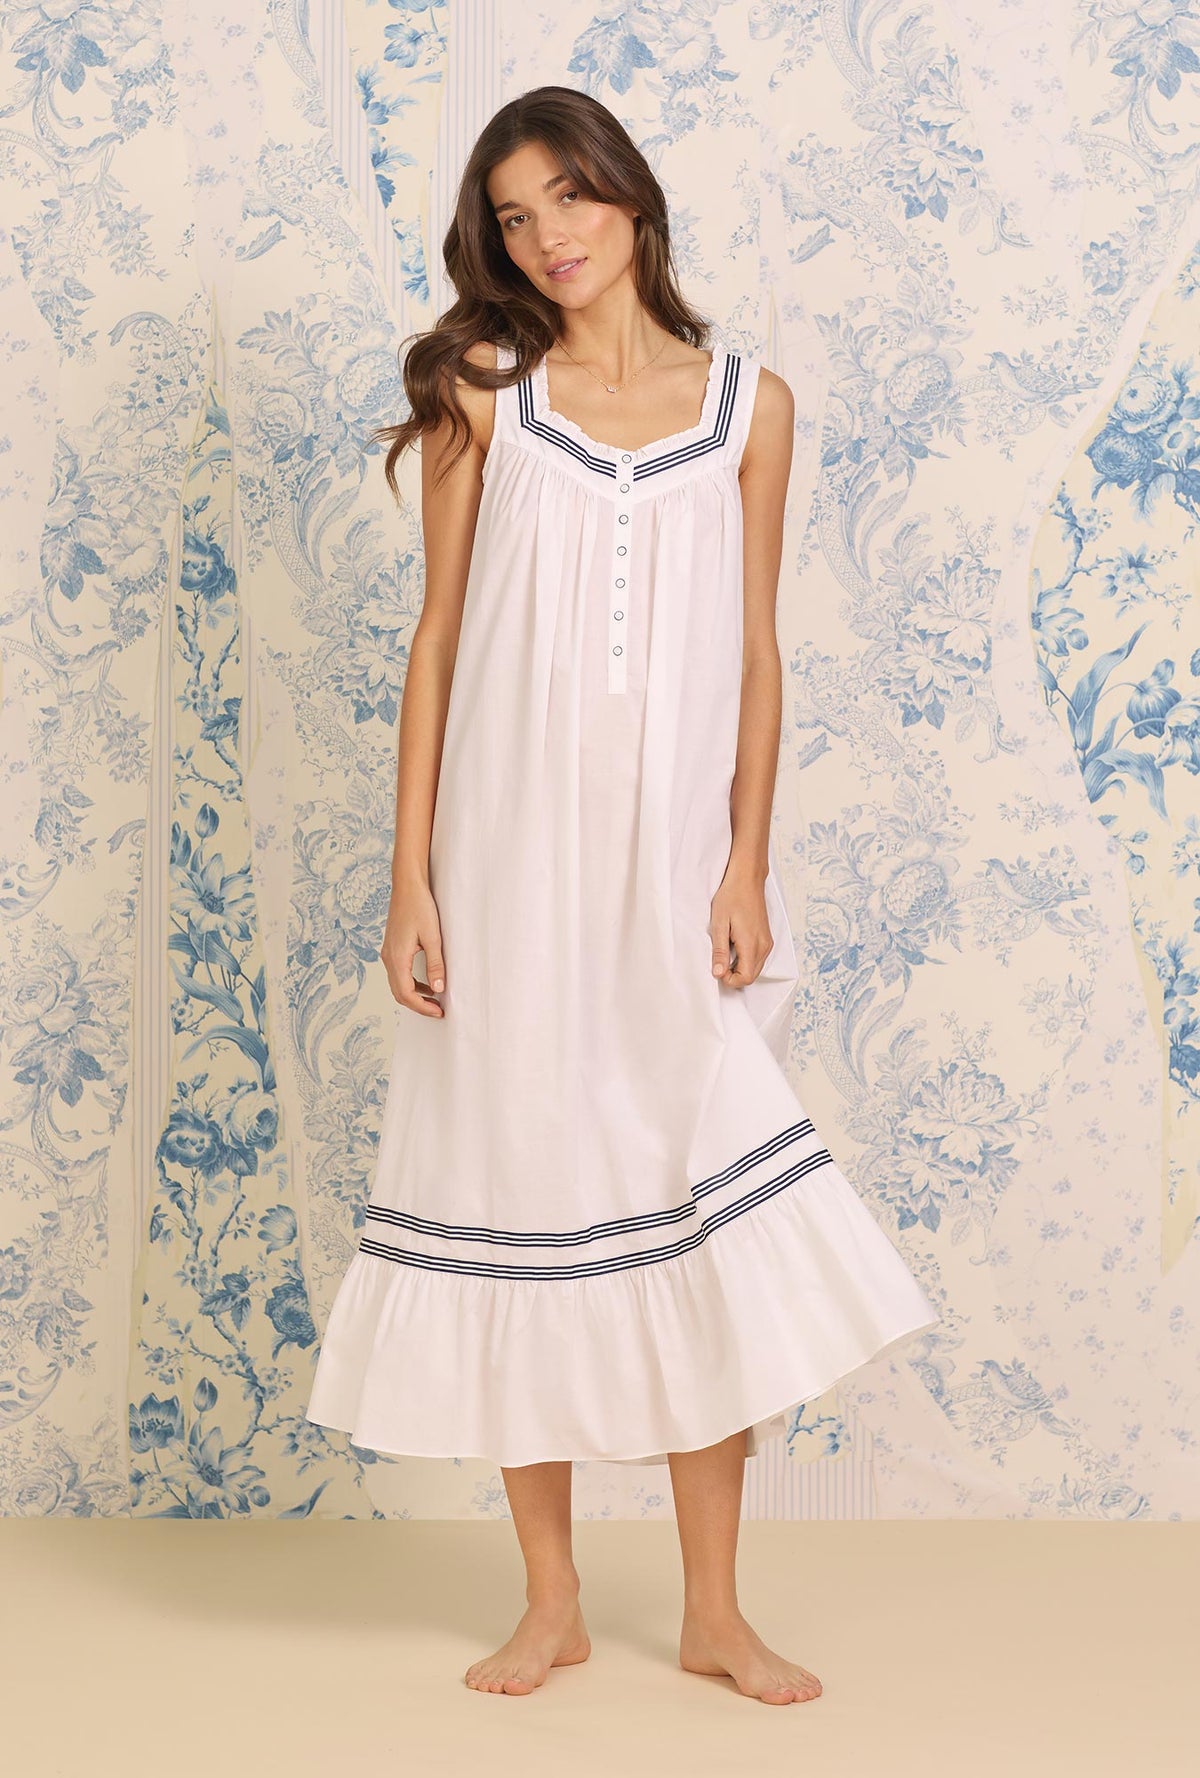 A lady wearing white sleeveless Cotton Nightgown with Nautical Ribbons print